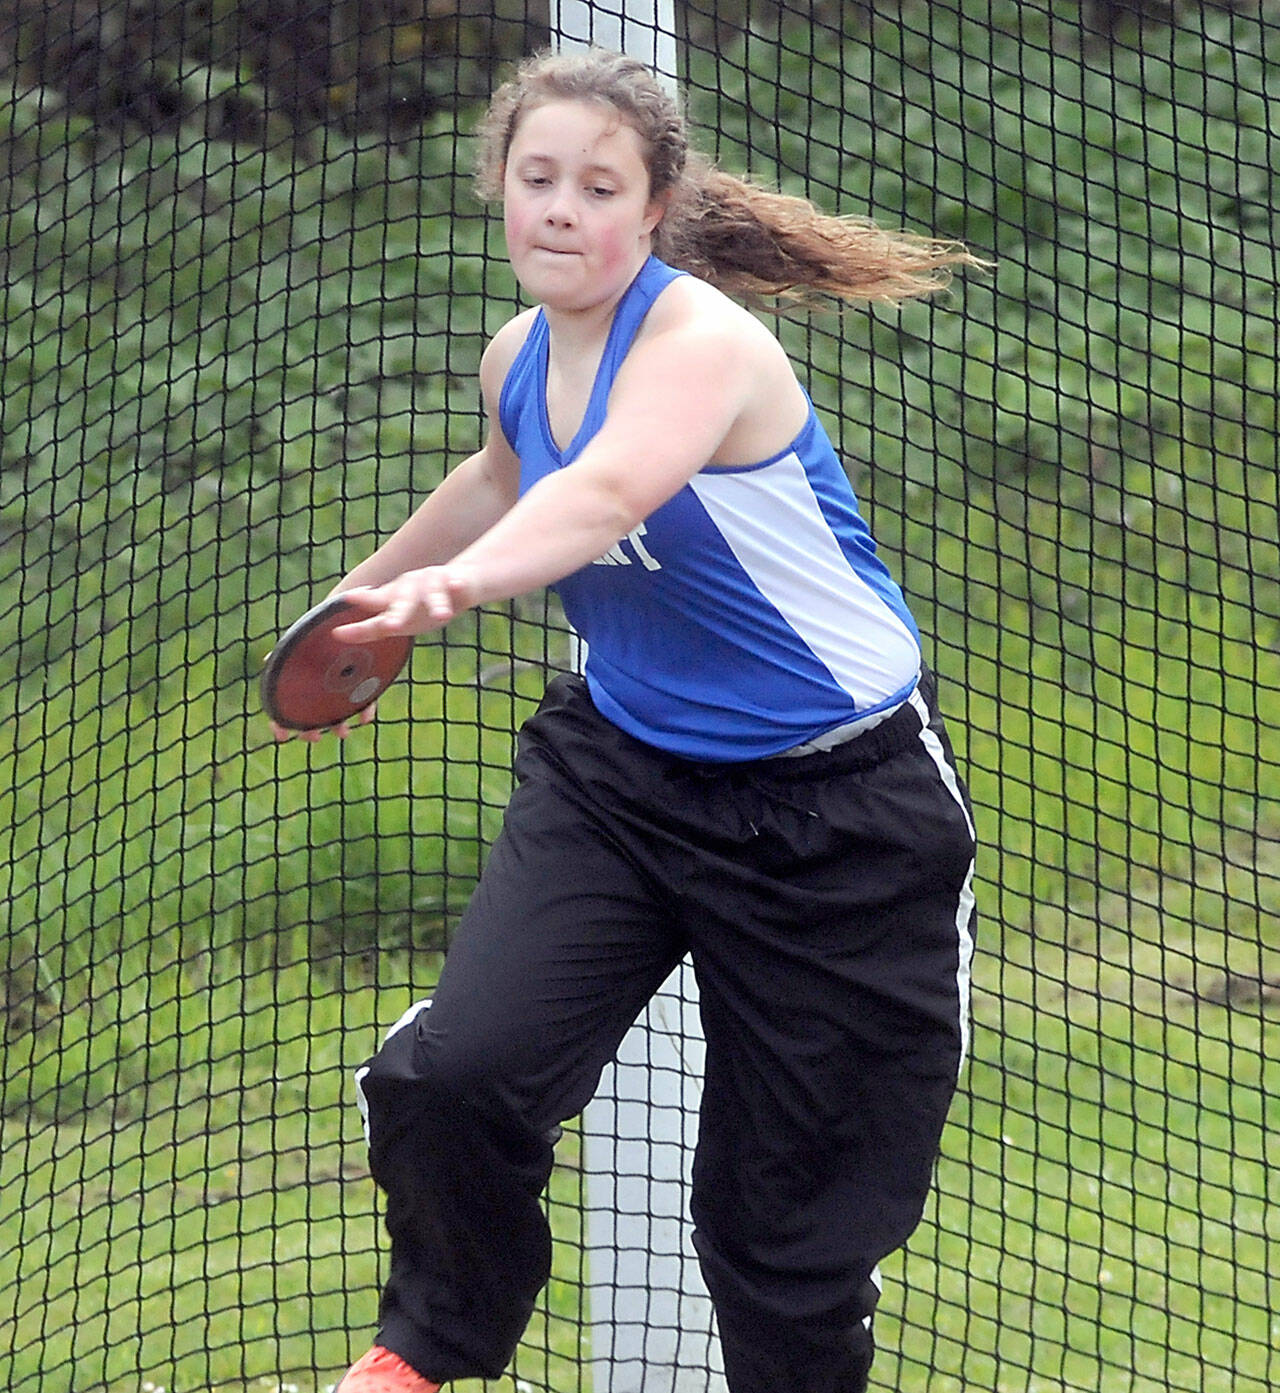 Crescent’s Katelyn Dunavant sets up to throw in Friday’s discus competition in Joyce. (Keith Thorpe/Peninsula Daily News)